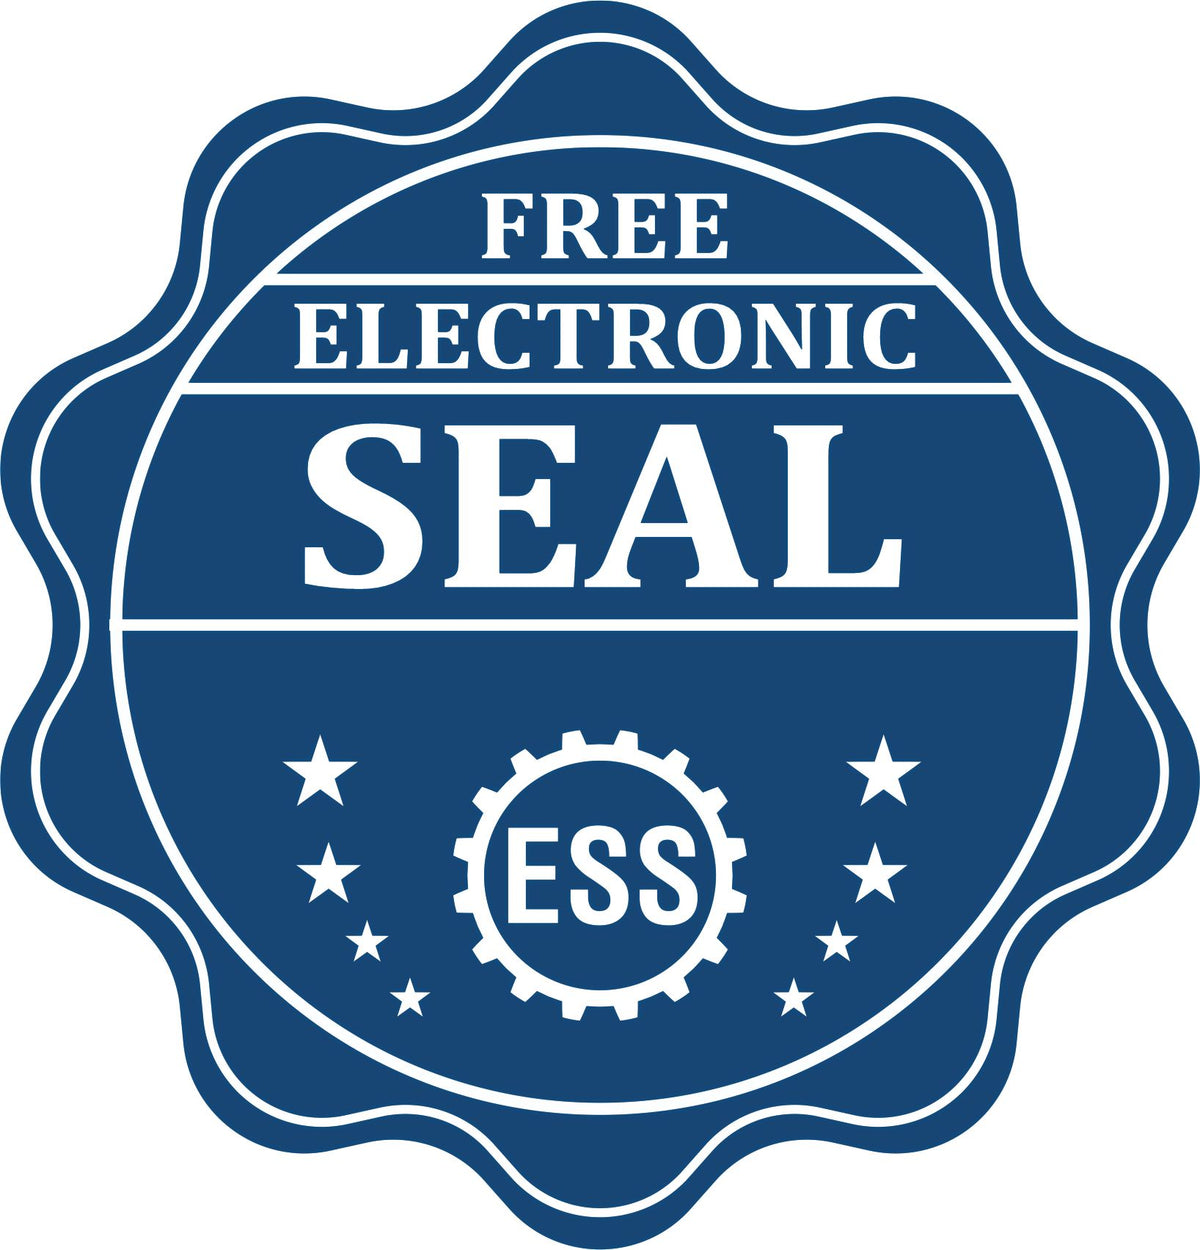 A badge showing a free electronic seal for the Heavy Duty Cast Iron Vermont Geologist Seal Embosser with stars and the ESS gear on the emblem.